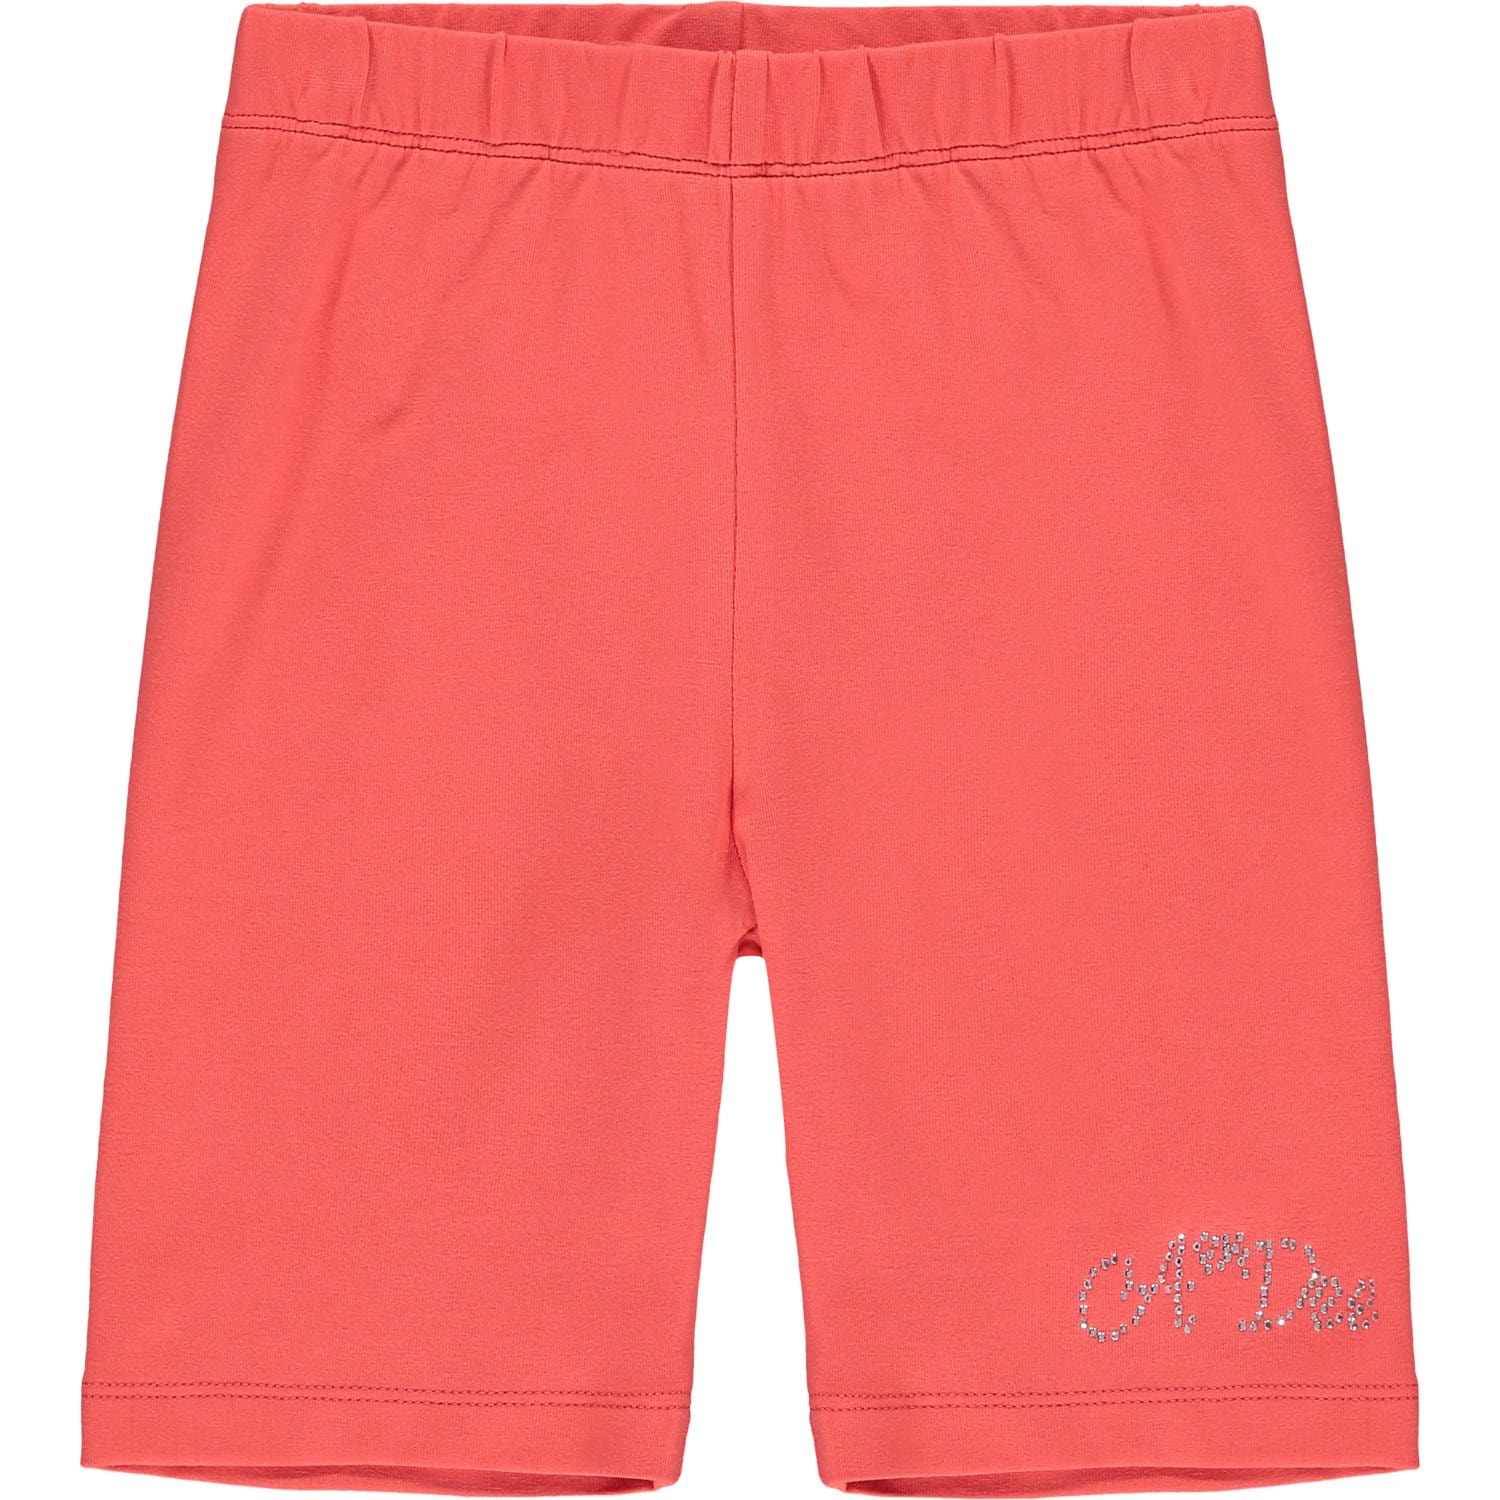 A DEE - Evelyn Watermelon Cycling Short Set - Red